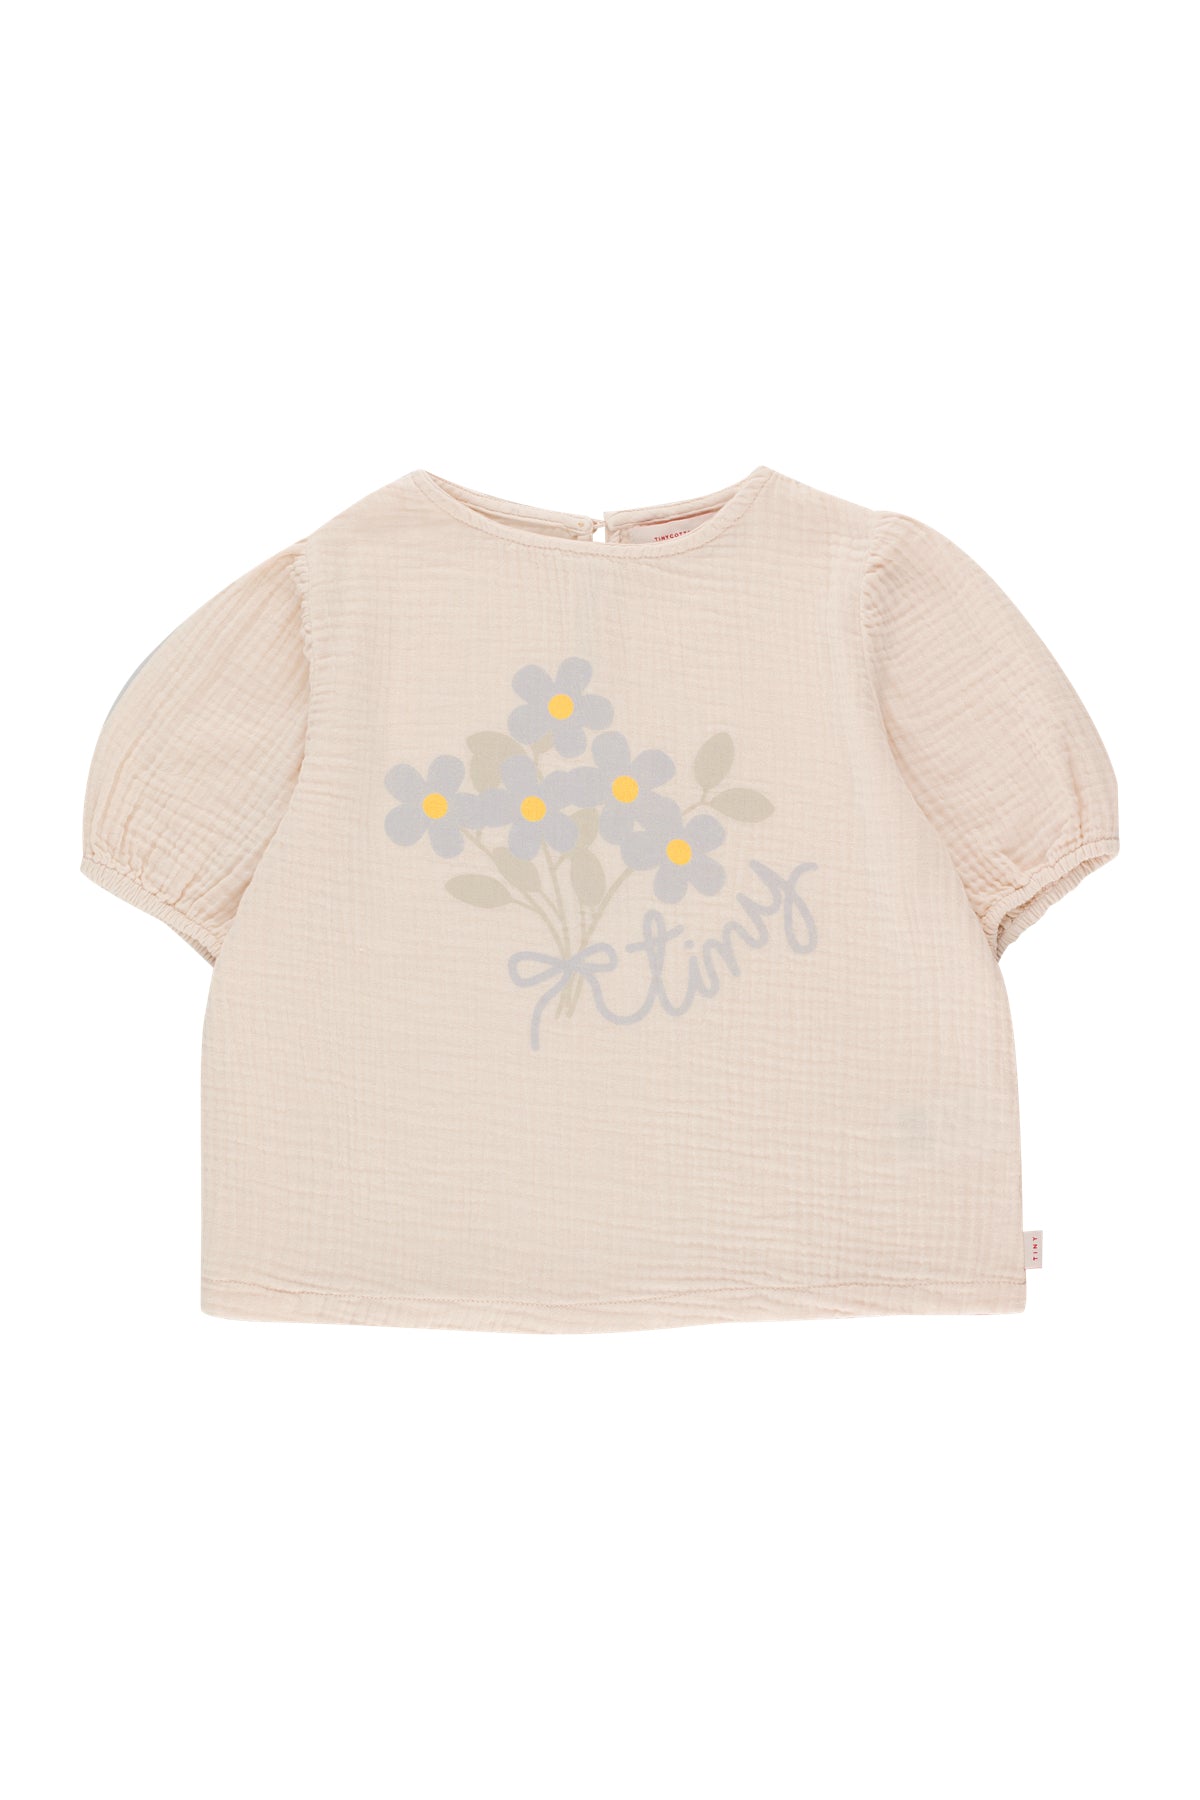 Tiny Cottons Tiny Flowers Puff Top